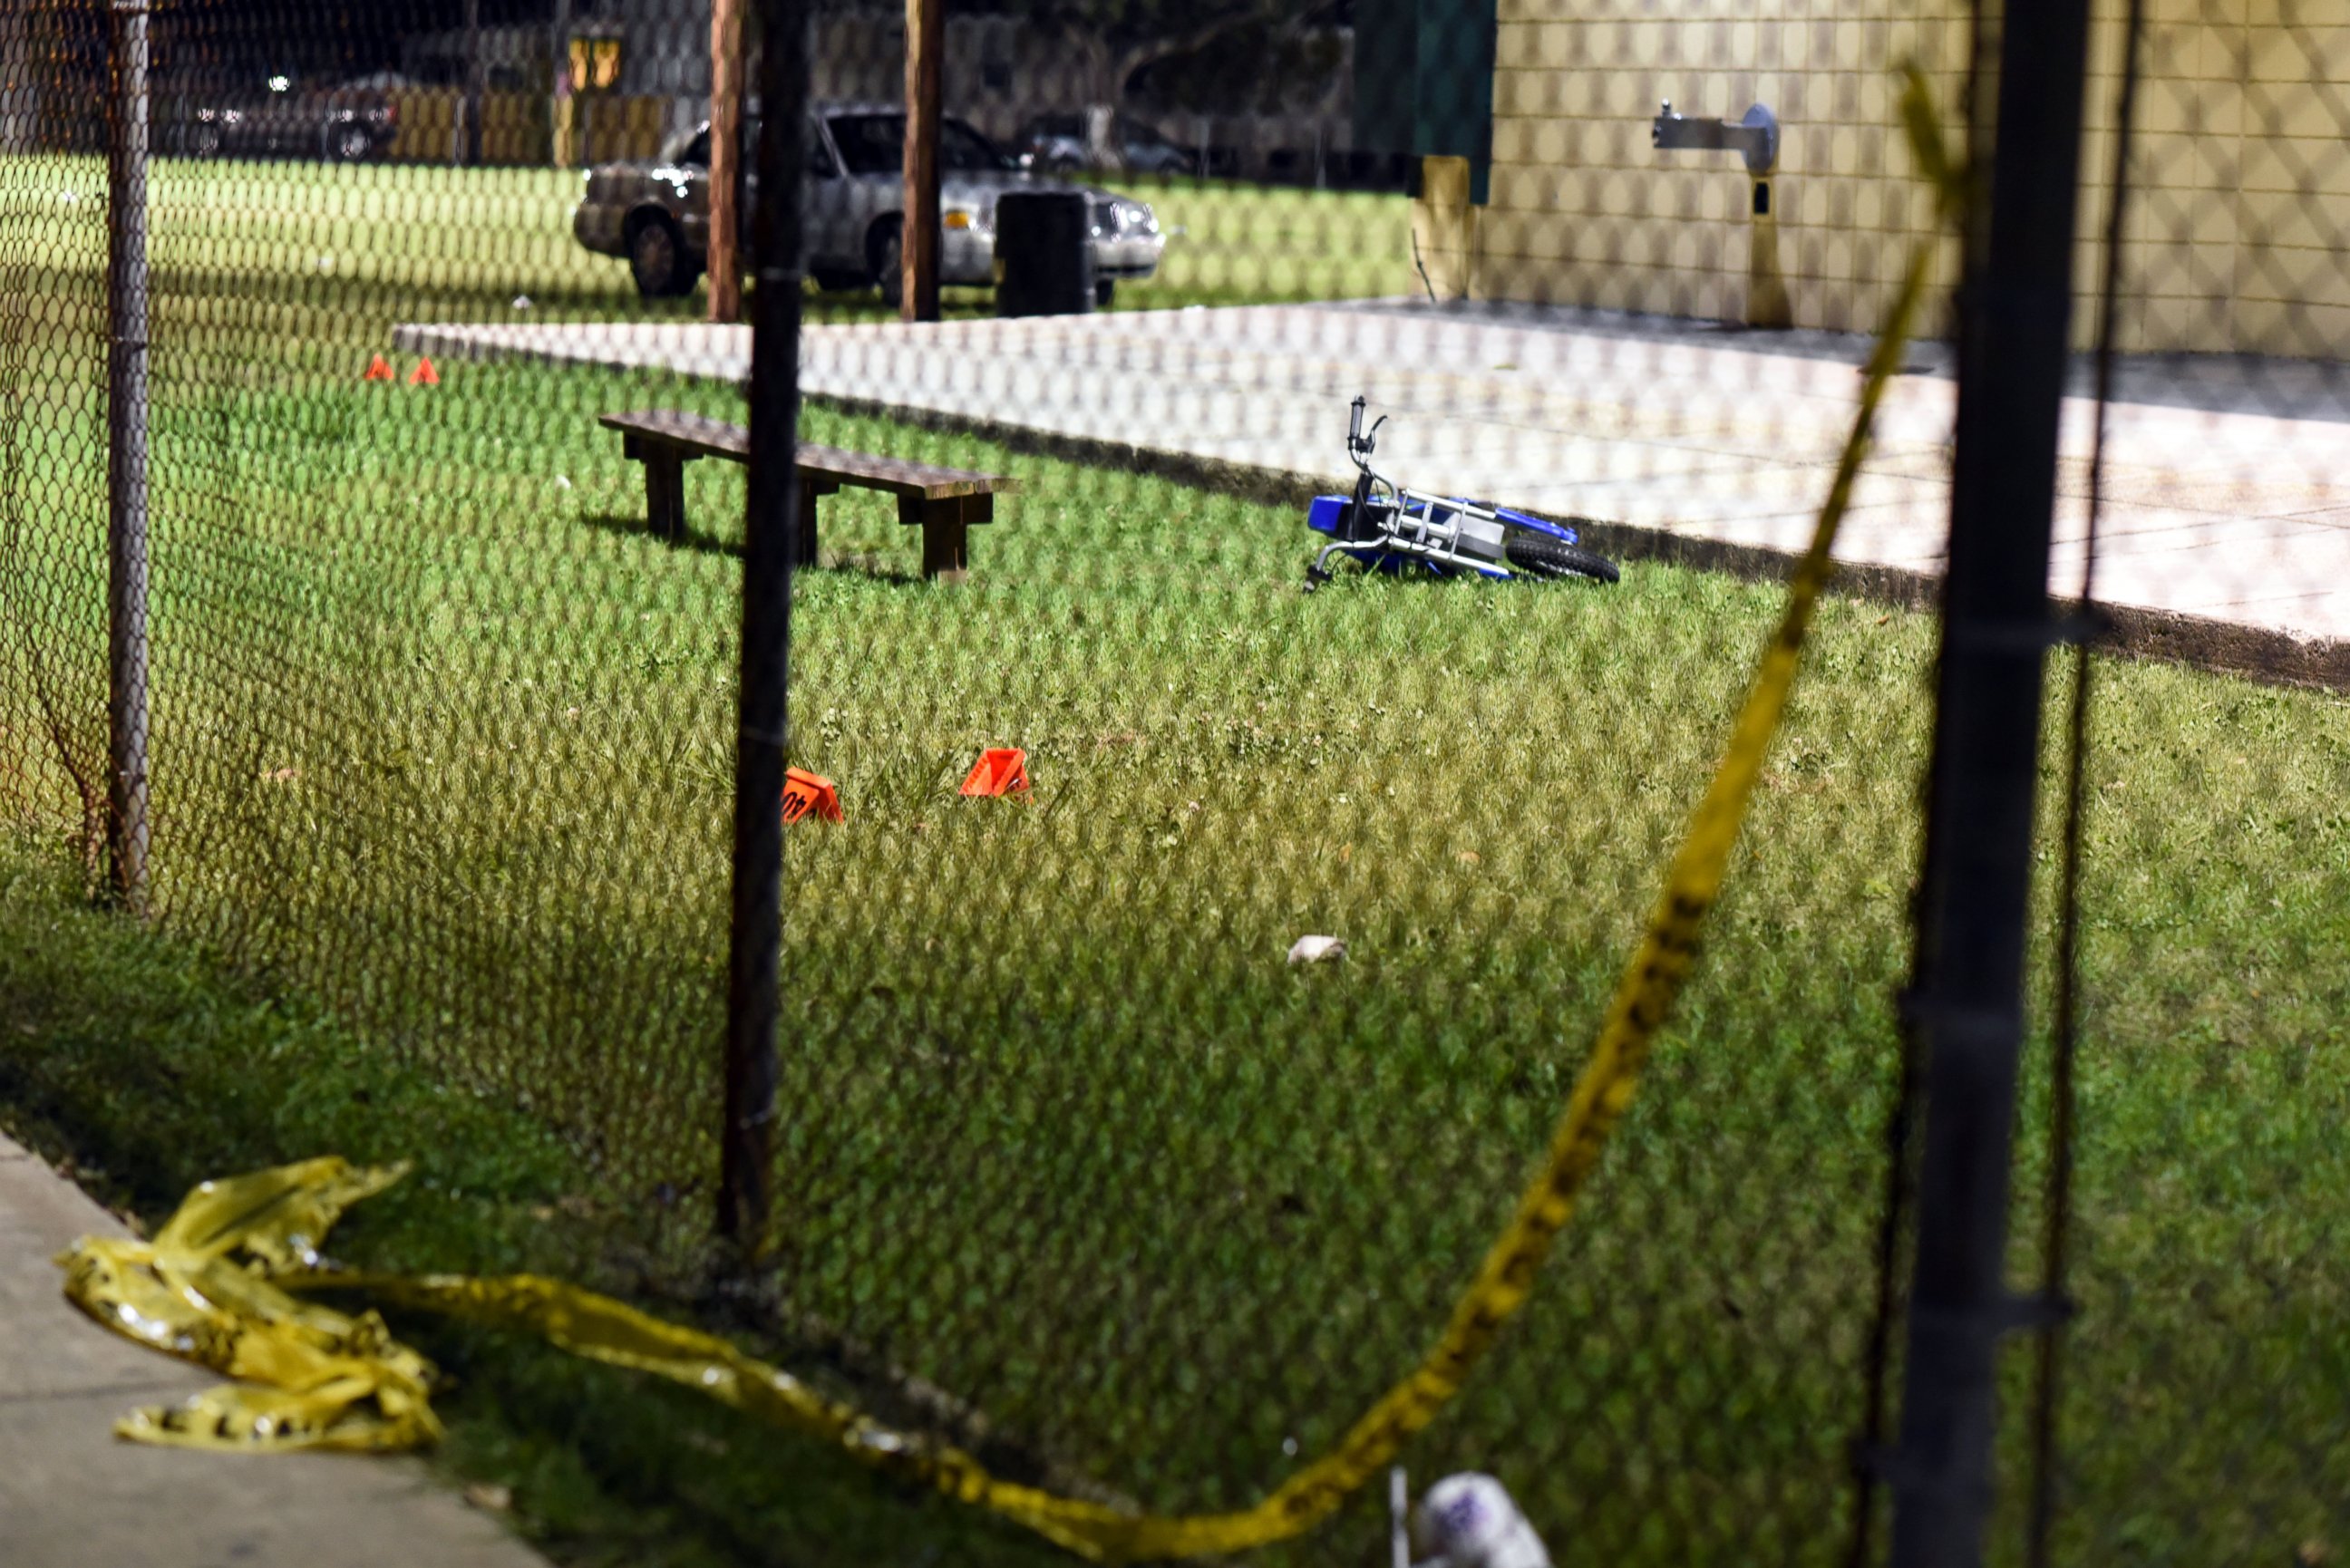 PHOTO: Evidence markers sit on the ground after a shooting at a playground on Nov. 22, 2015 in New Orleans.